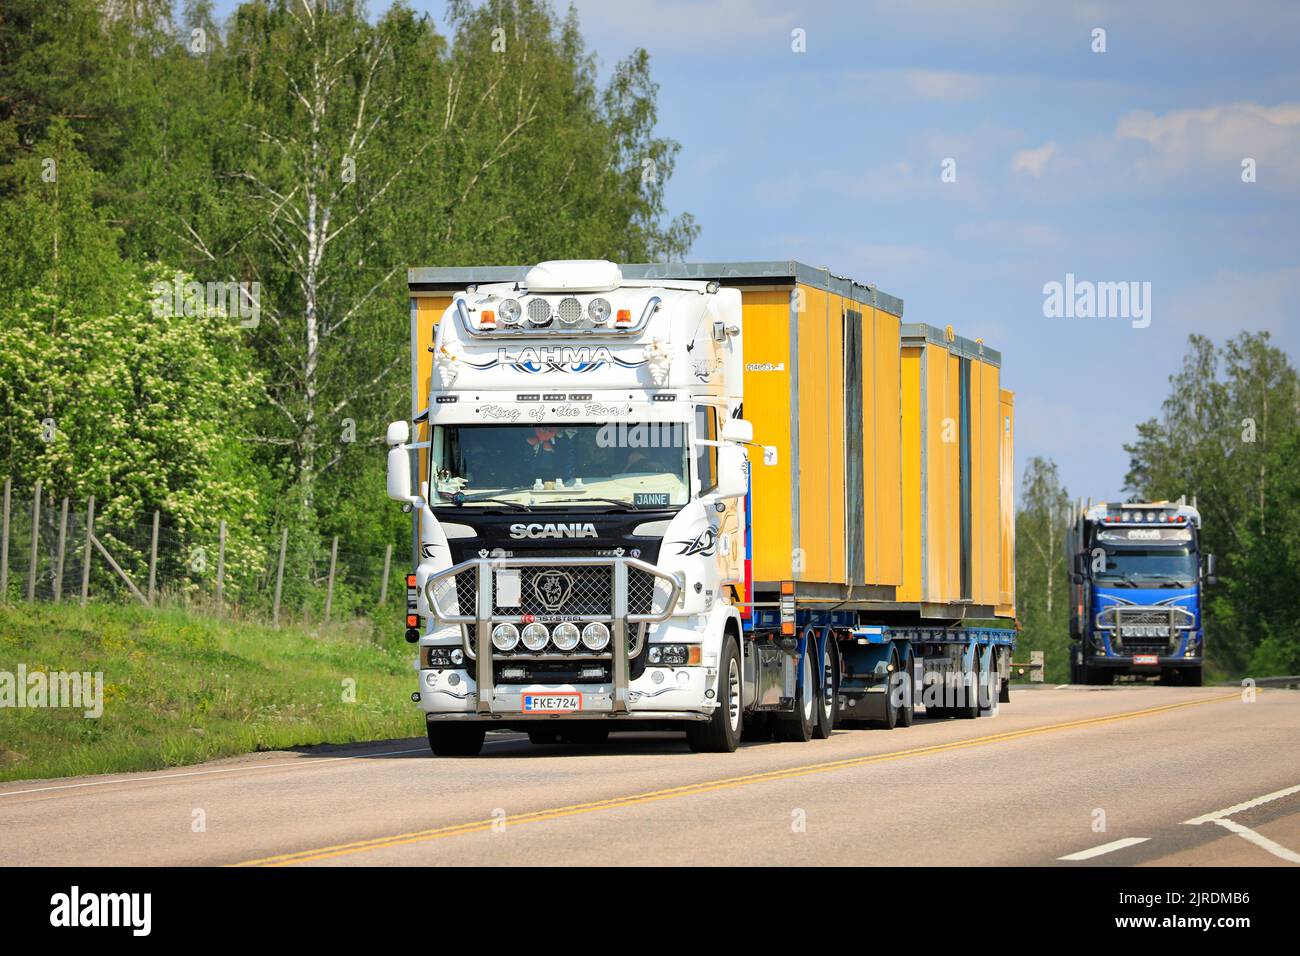 White customised Scania truck Lahma-Trans Oy hauls portable cabins as wide load transport in highway 9 lorry traffic. Orivesi, Finland. June 6, 2019. Stock Photo